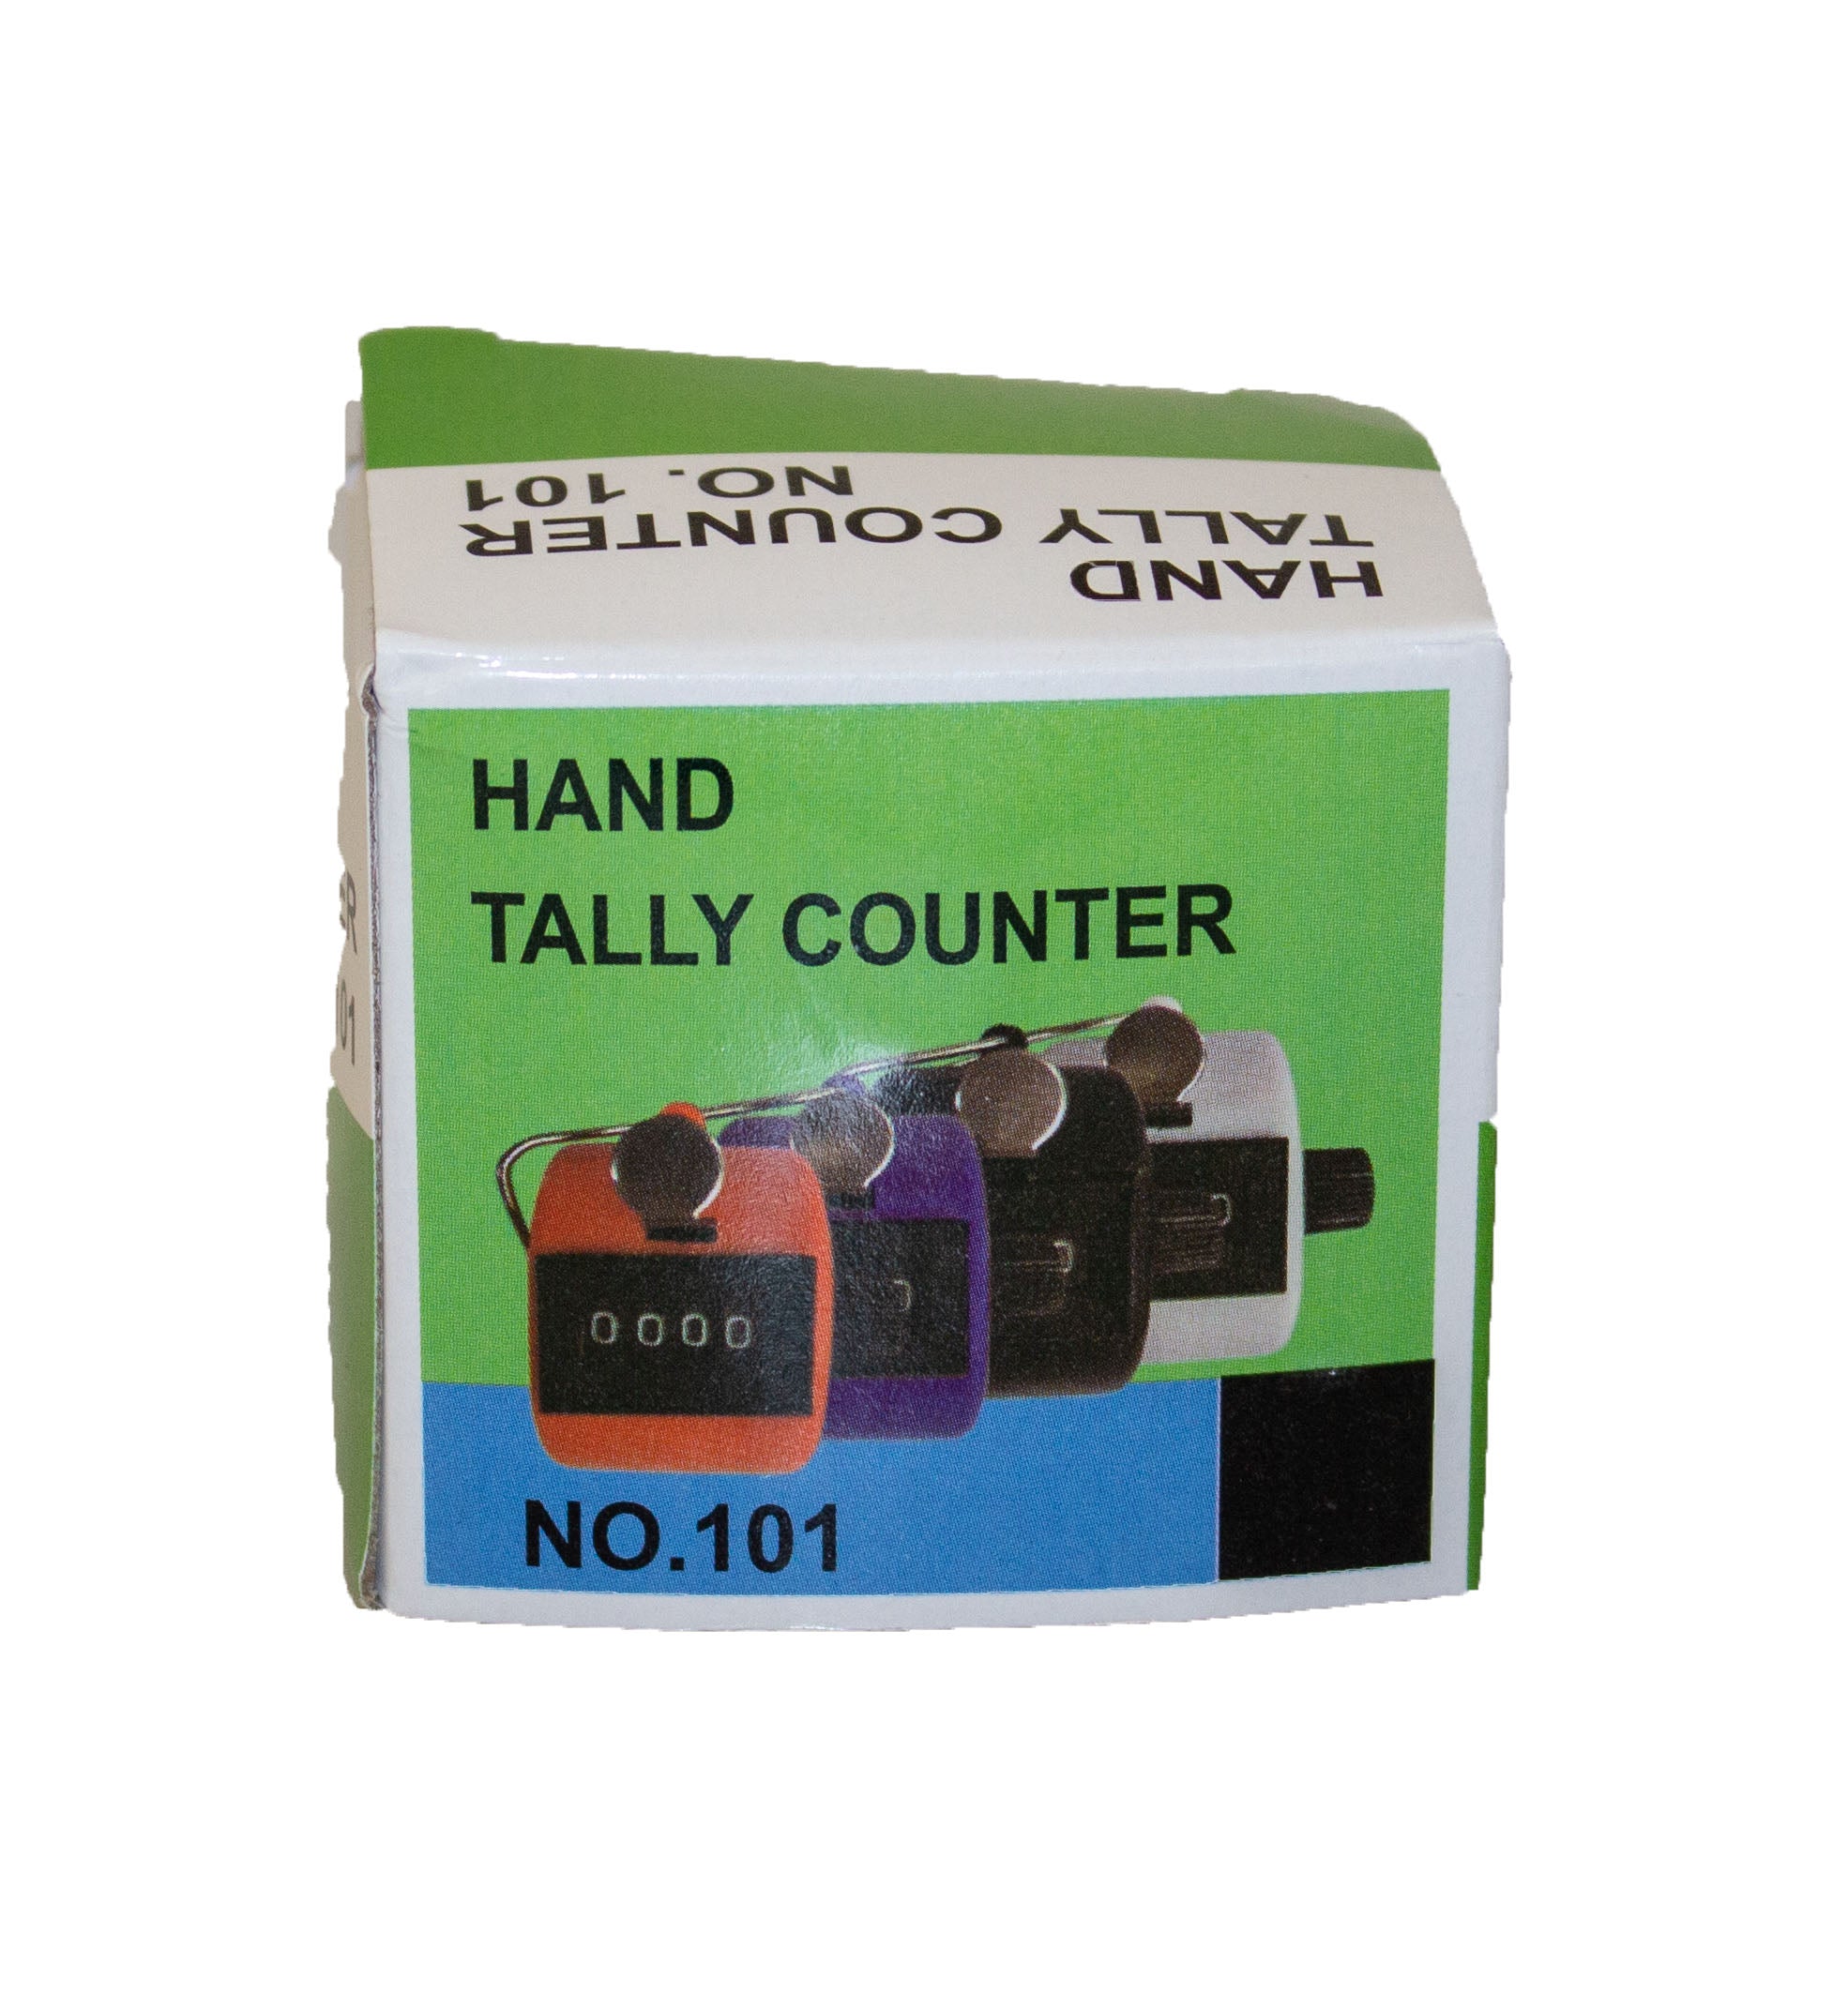 Hand Tally Counter (Color)